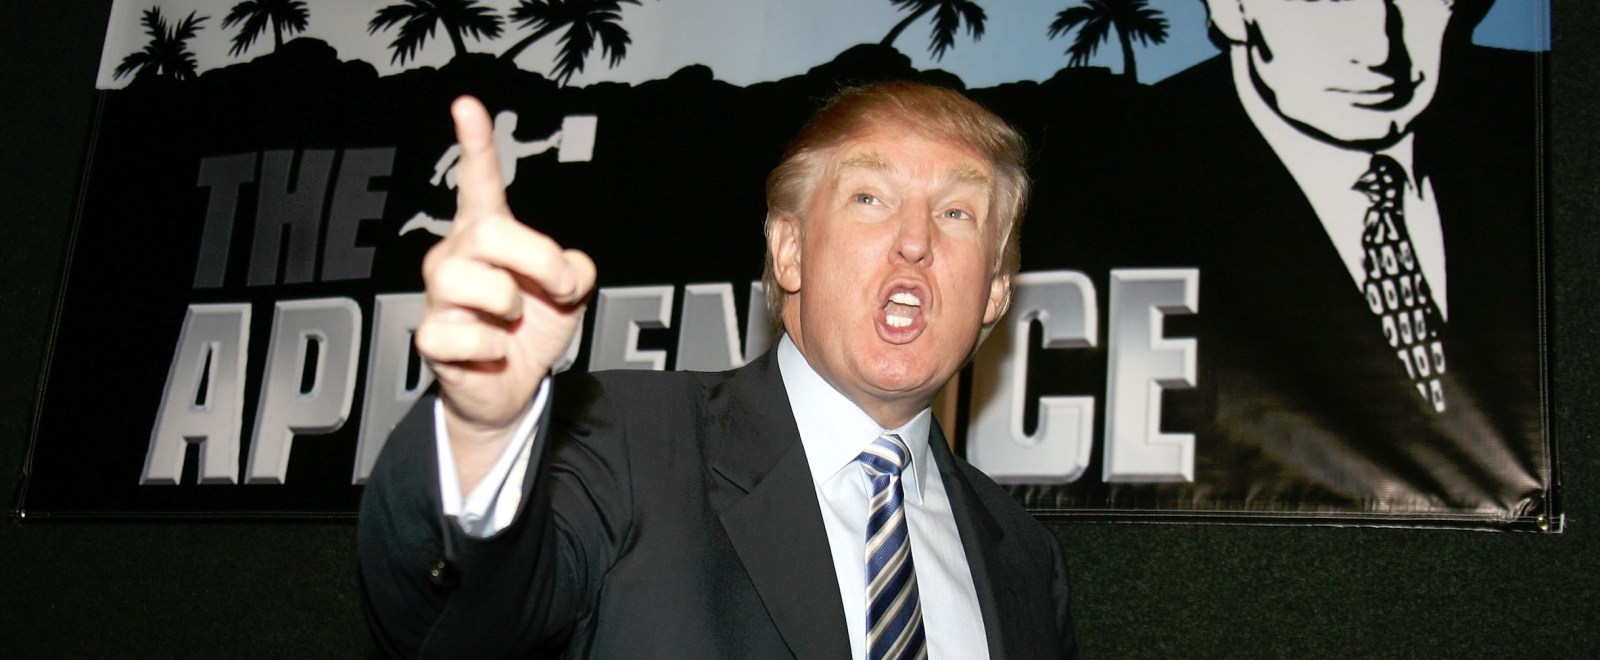 Trump Called ‘The Apprentice’ One Of The ‘Most Successful Shows’ Ever While Resigning From The Screen Actors Guild